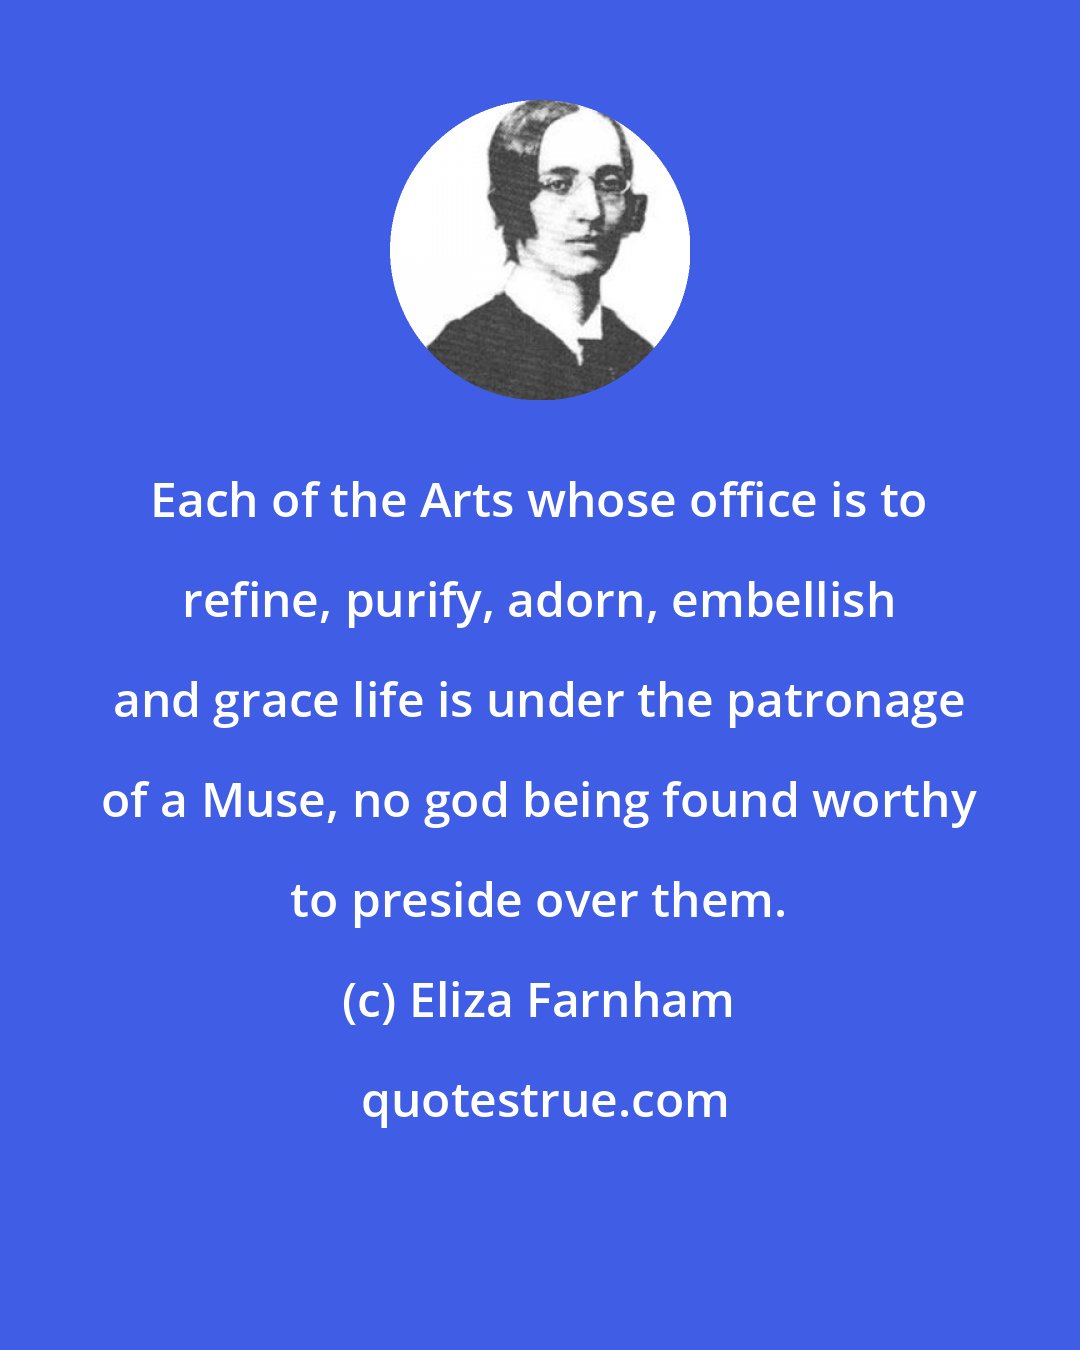 Eliza Farnham: Each of the Arts whose office is to refine, purify, adorn, embellish and grace life is under the patronage of a Muse, no god being found worthy to preside over them.